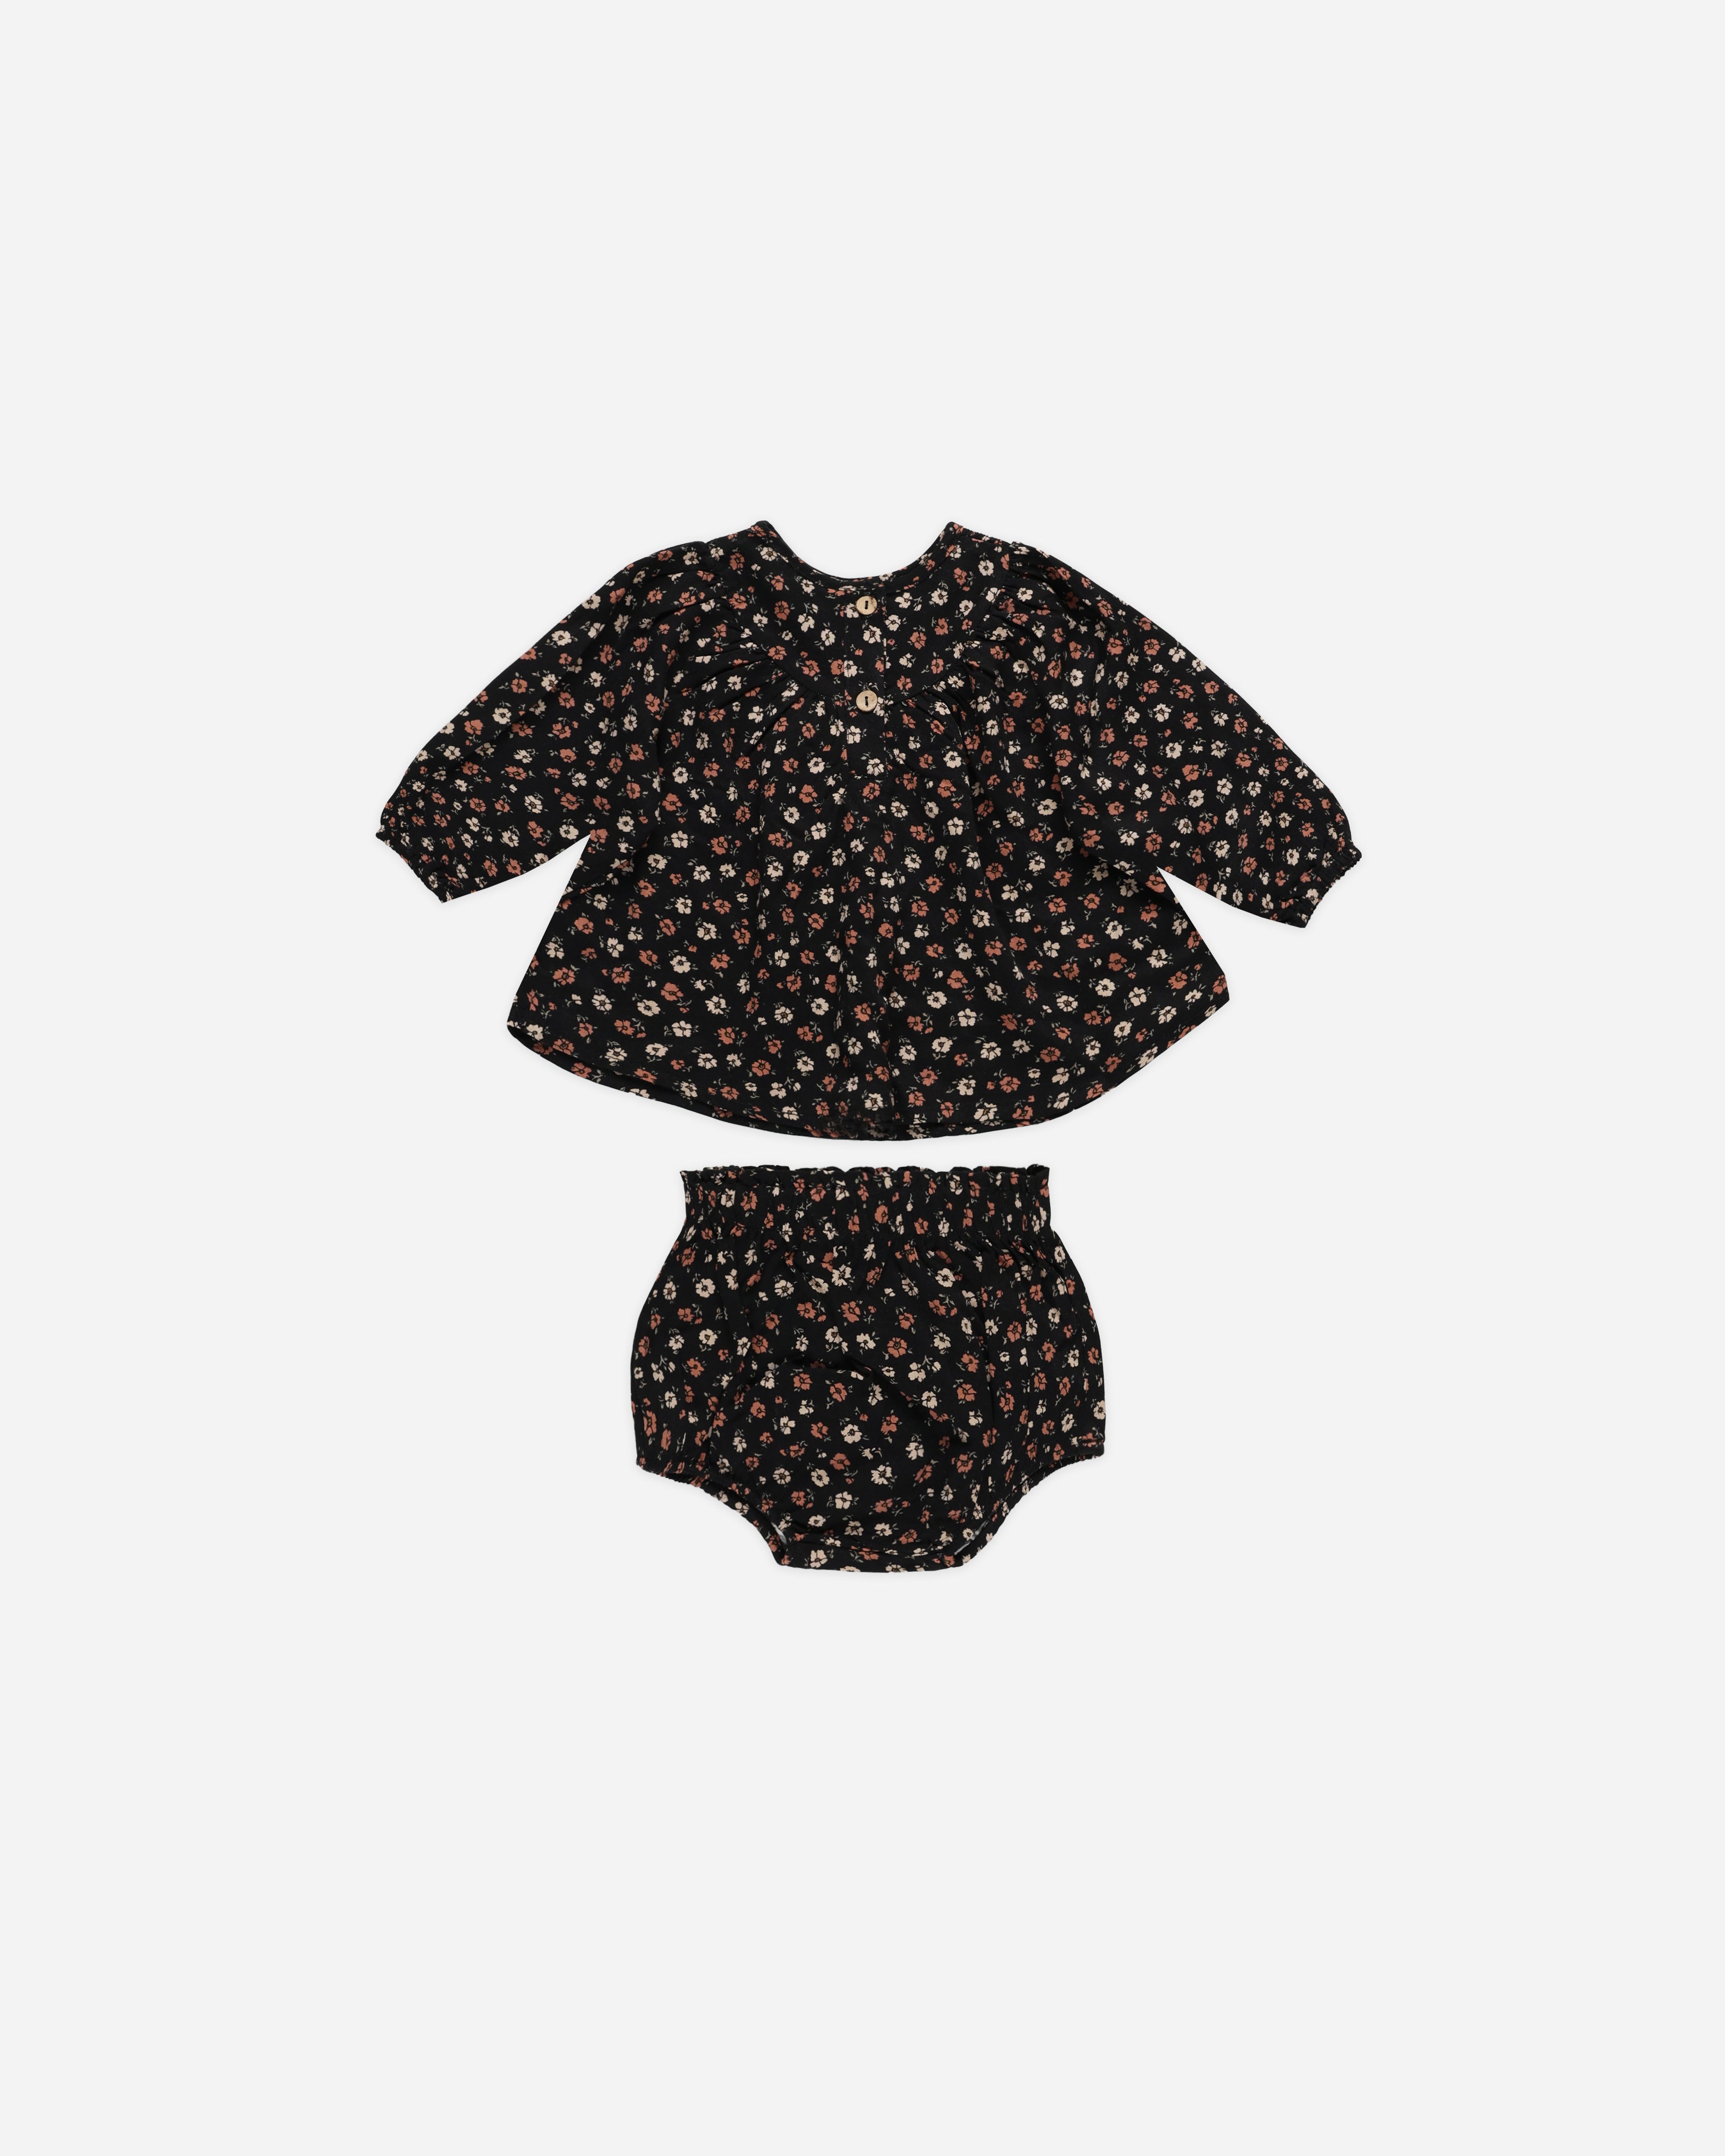 Eloise Set || Dark Floral - Rylee + Cru | Kids Clothes | Trendy Baby Clothes | Modern Infant Outfits |